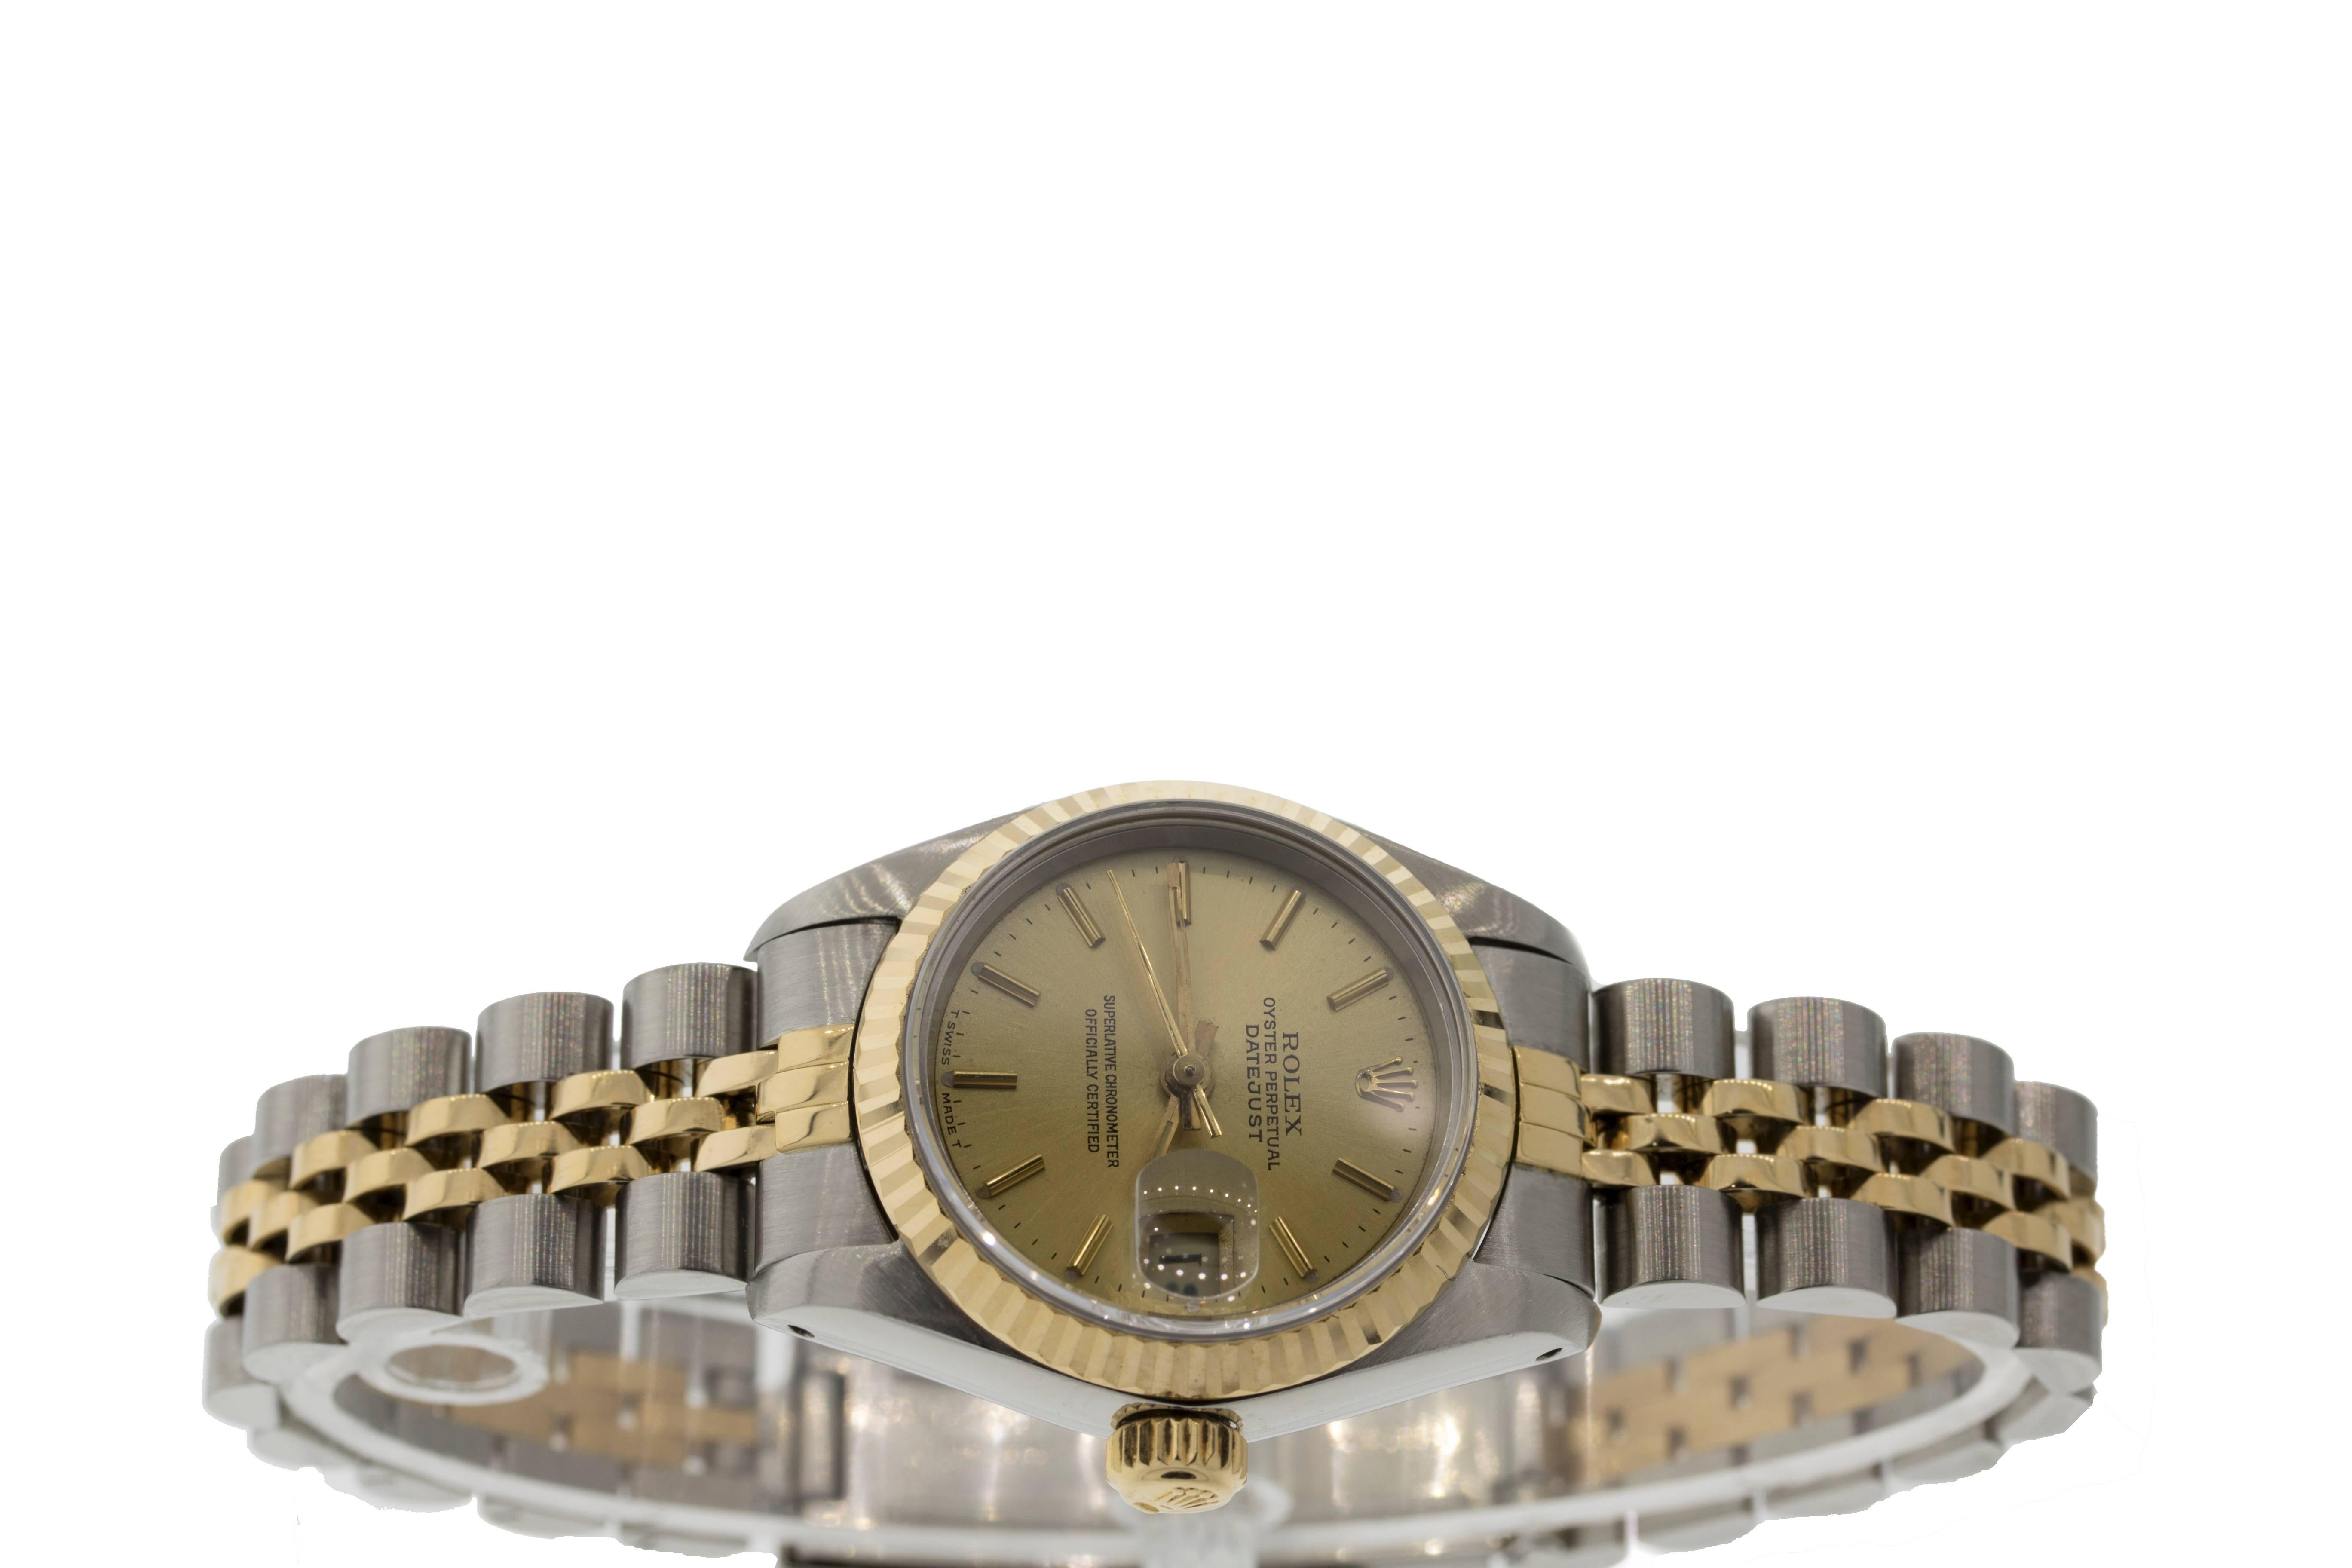 Brand Name: Rolex
Style Number: 32330
Style Name: Datejust
Color Name (Dial): Champagne with Gold Hour Markers
Country of Manufacture: Switzerland
Gender: Womens
Strap Material: Stainless Steel/18K Yellow Gold
Case Metal: Stainless Steel/18K